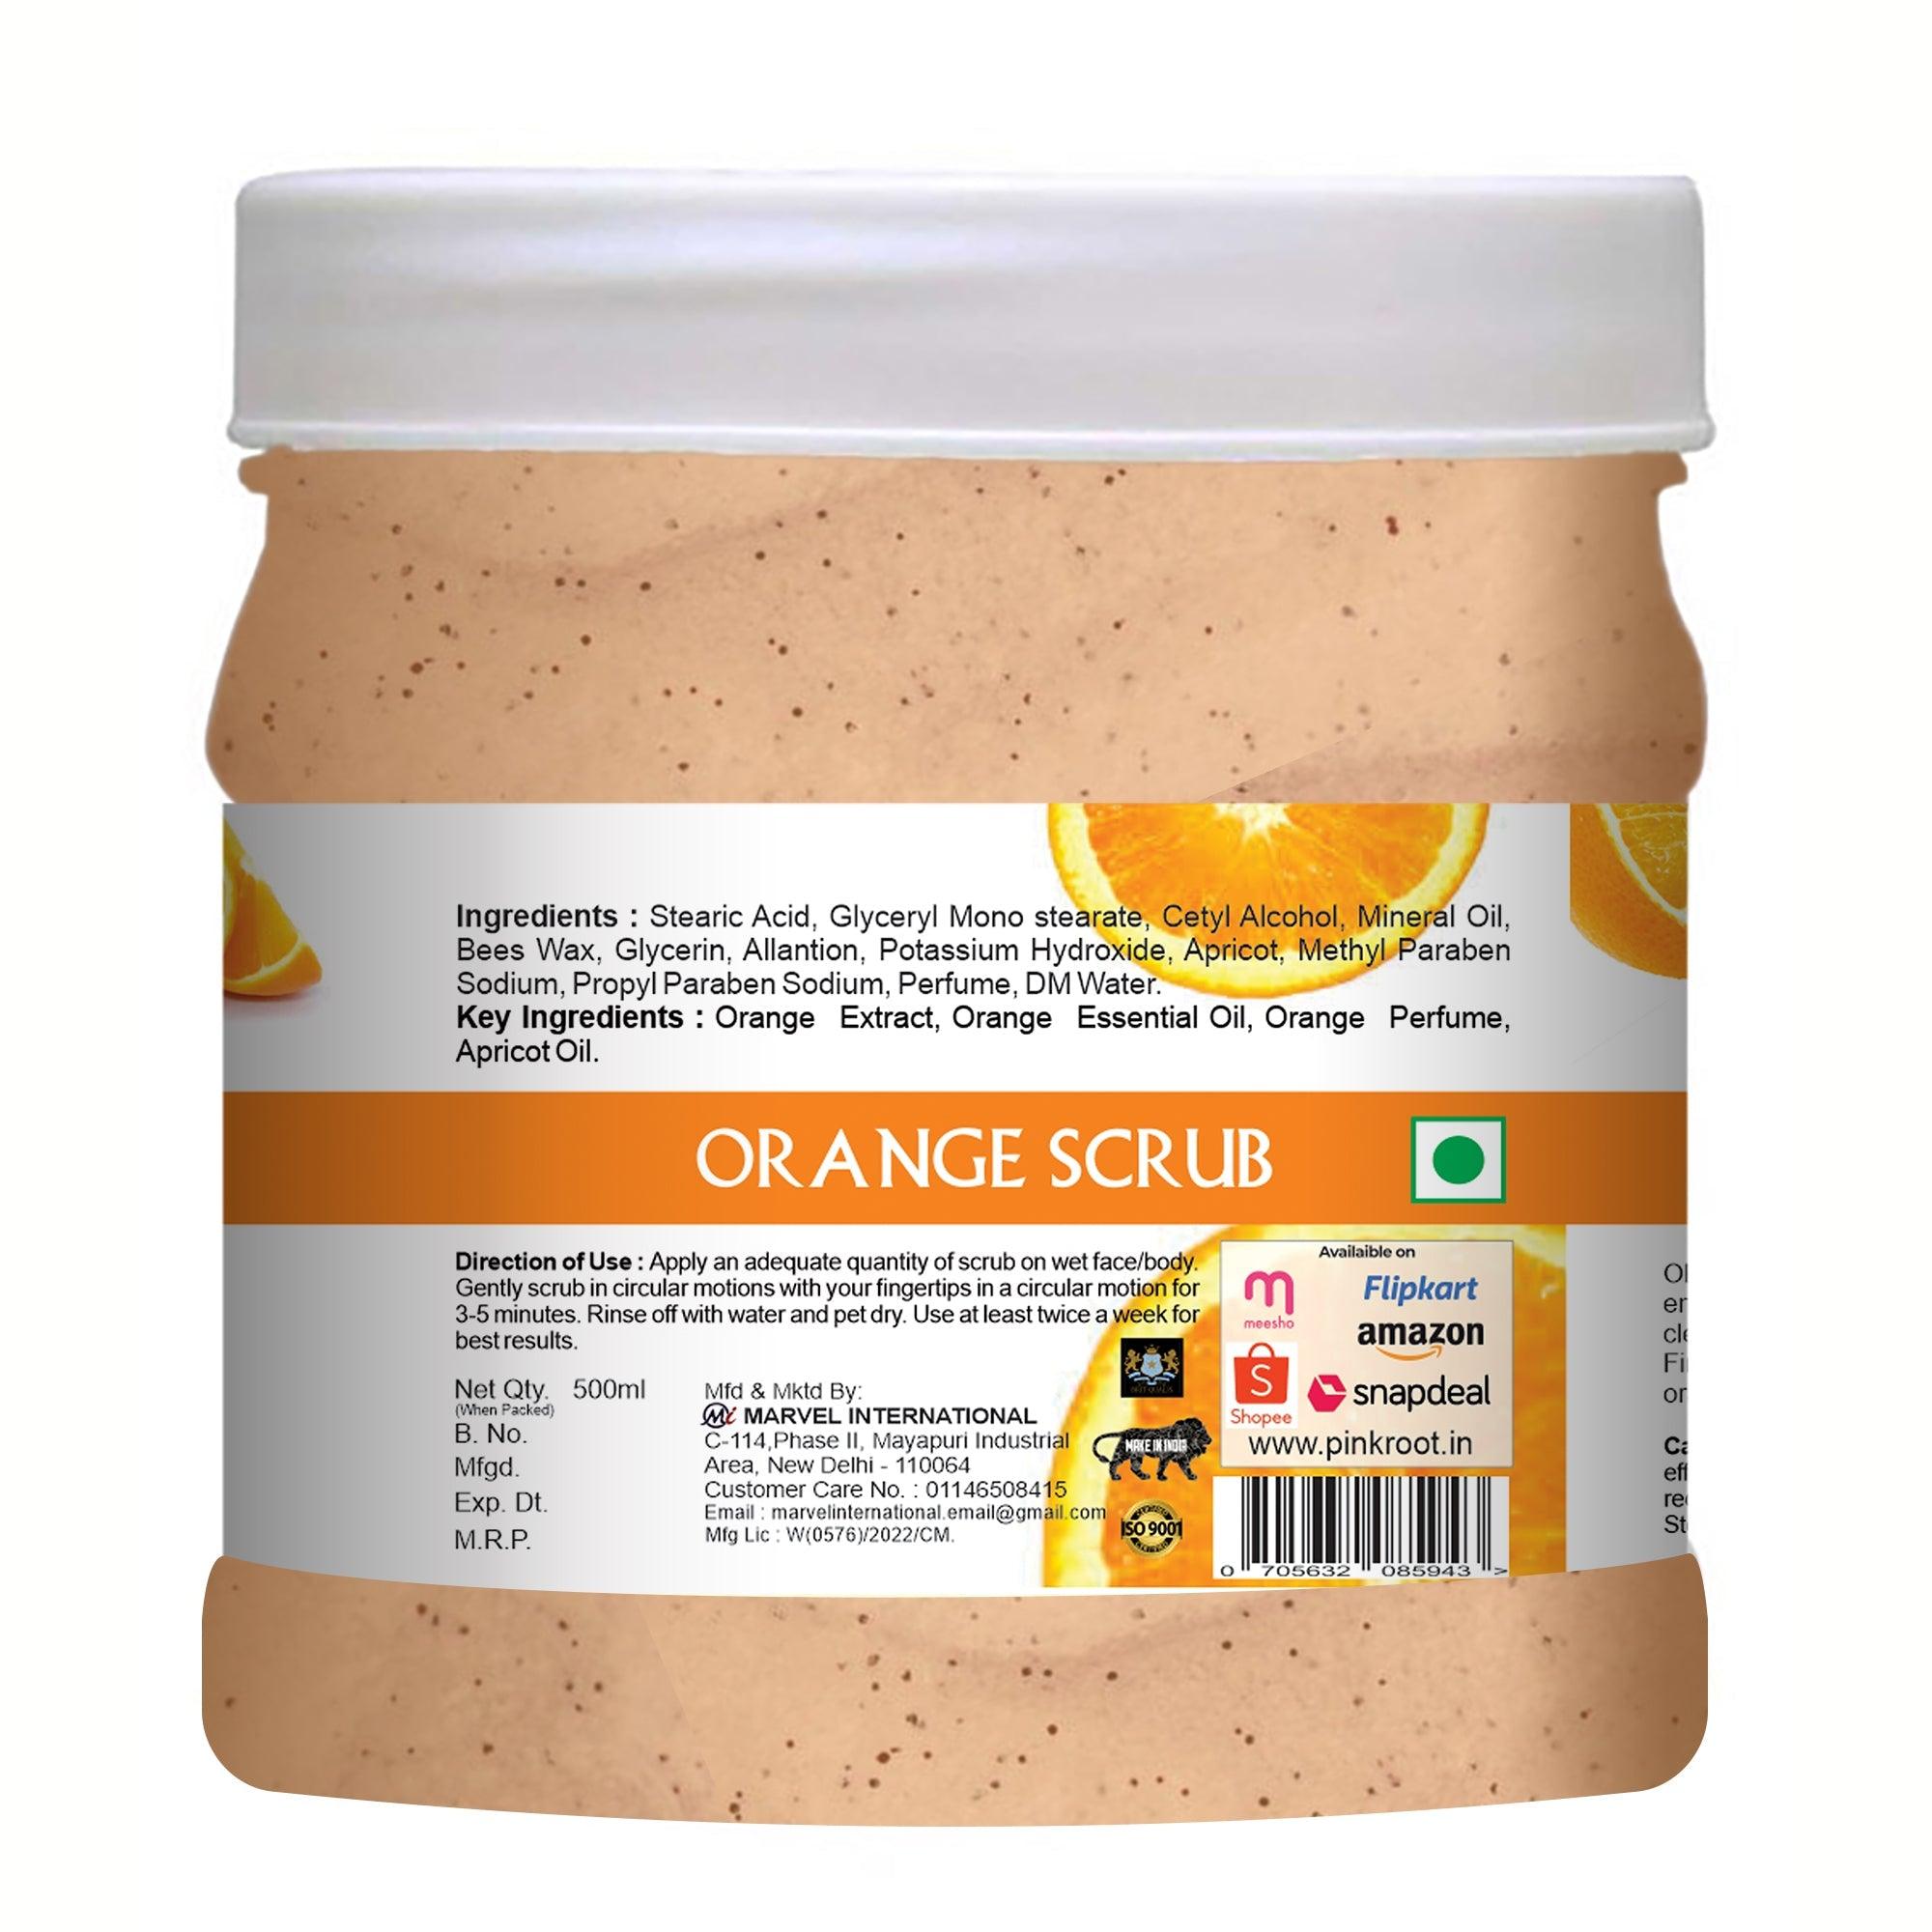 Orange Scrub for Face & Body with Apricot Oil 500ml - Pink Root